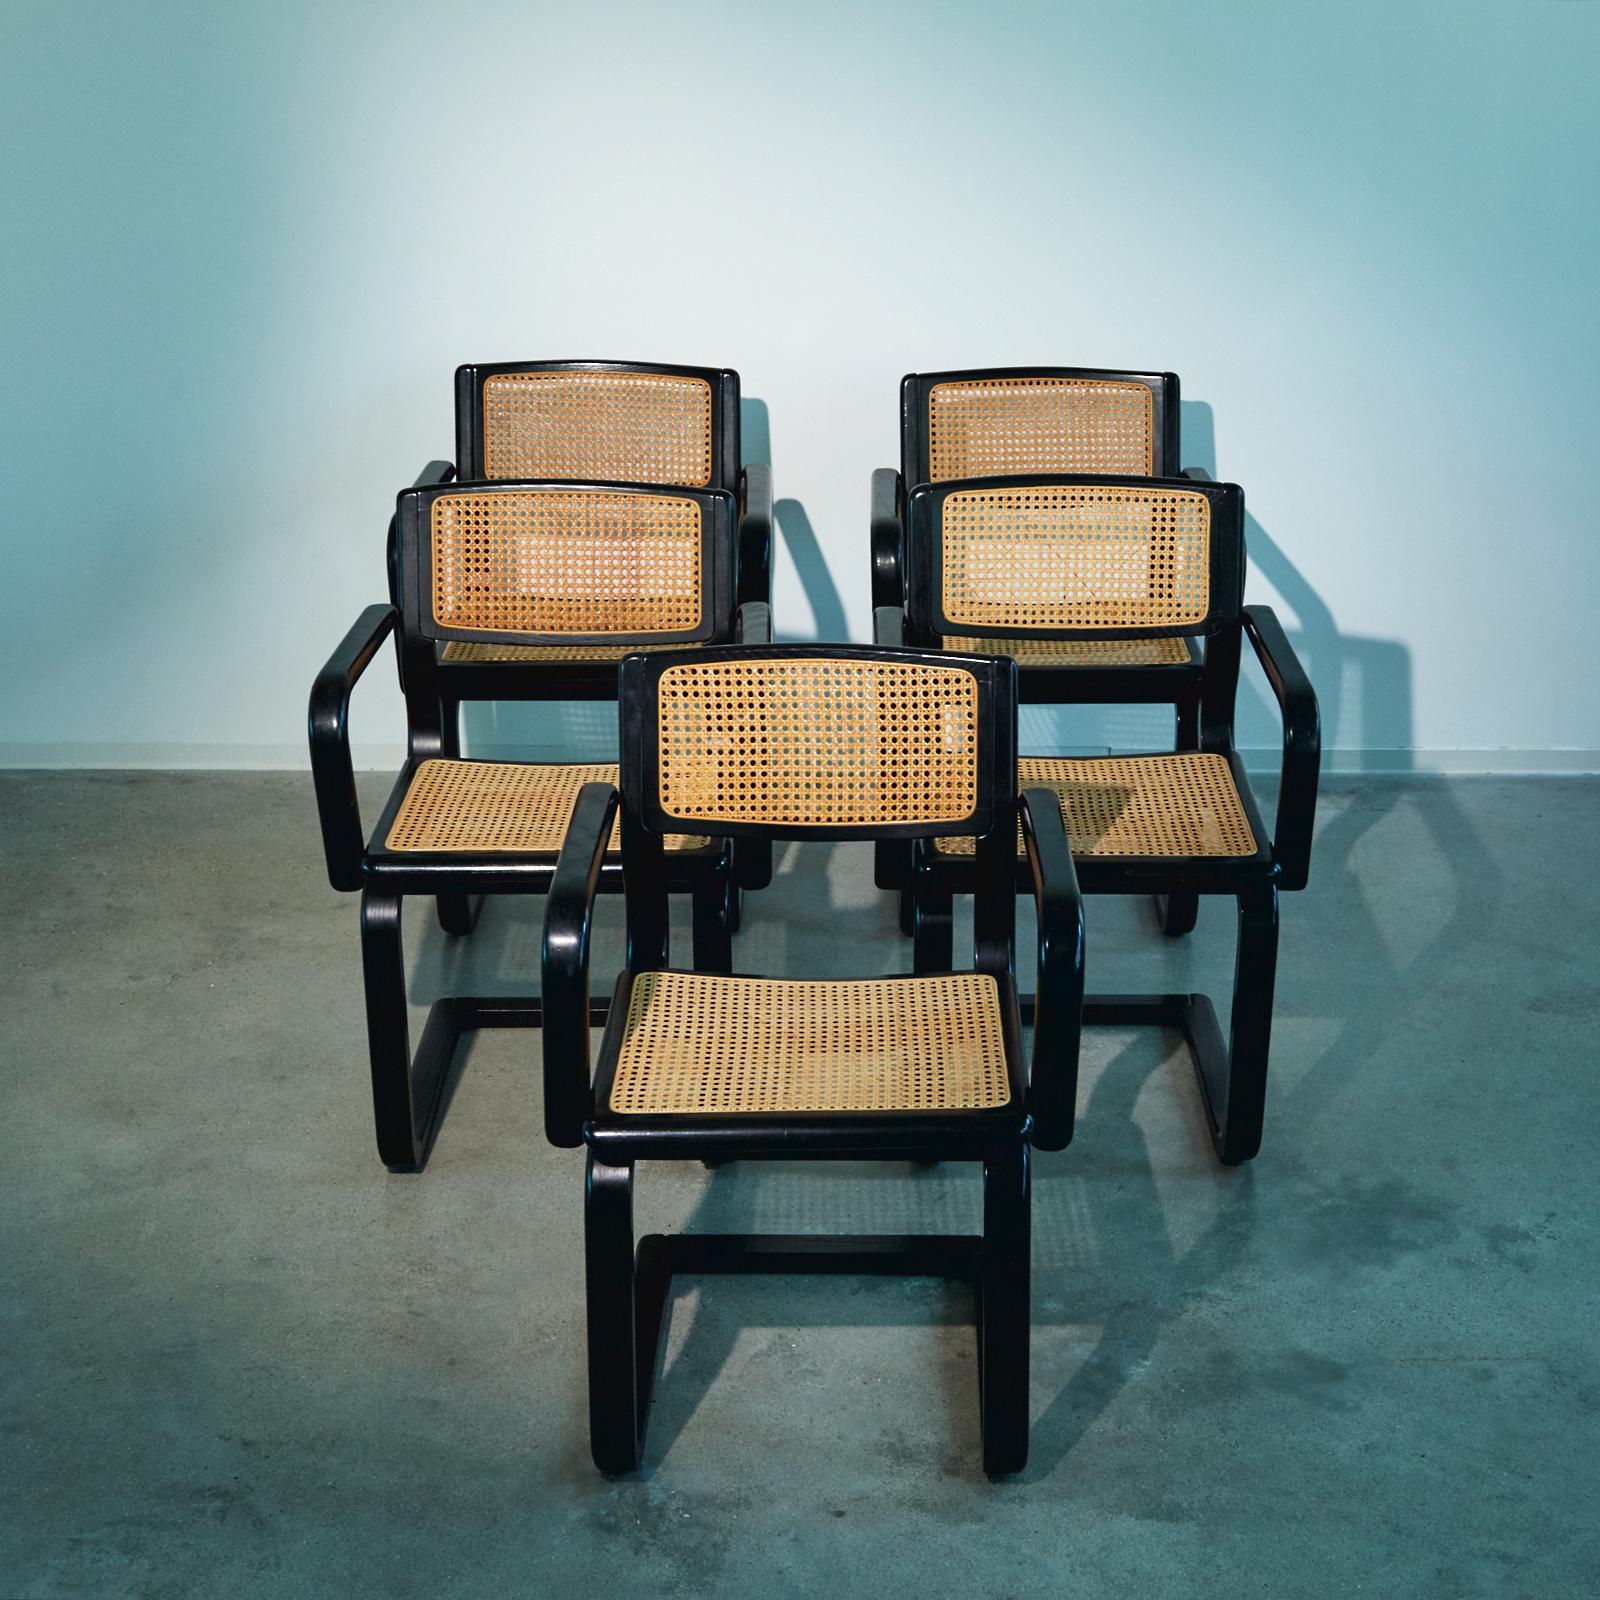 Lübke, Germany, set of cantilever chairs, 1970s, 5 pieces, wood, woven rattan fabric.